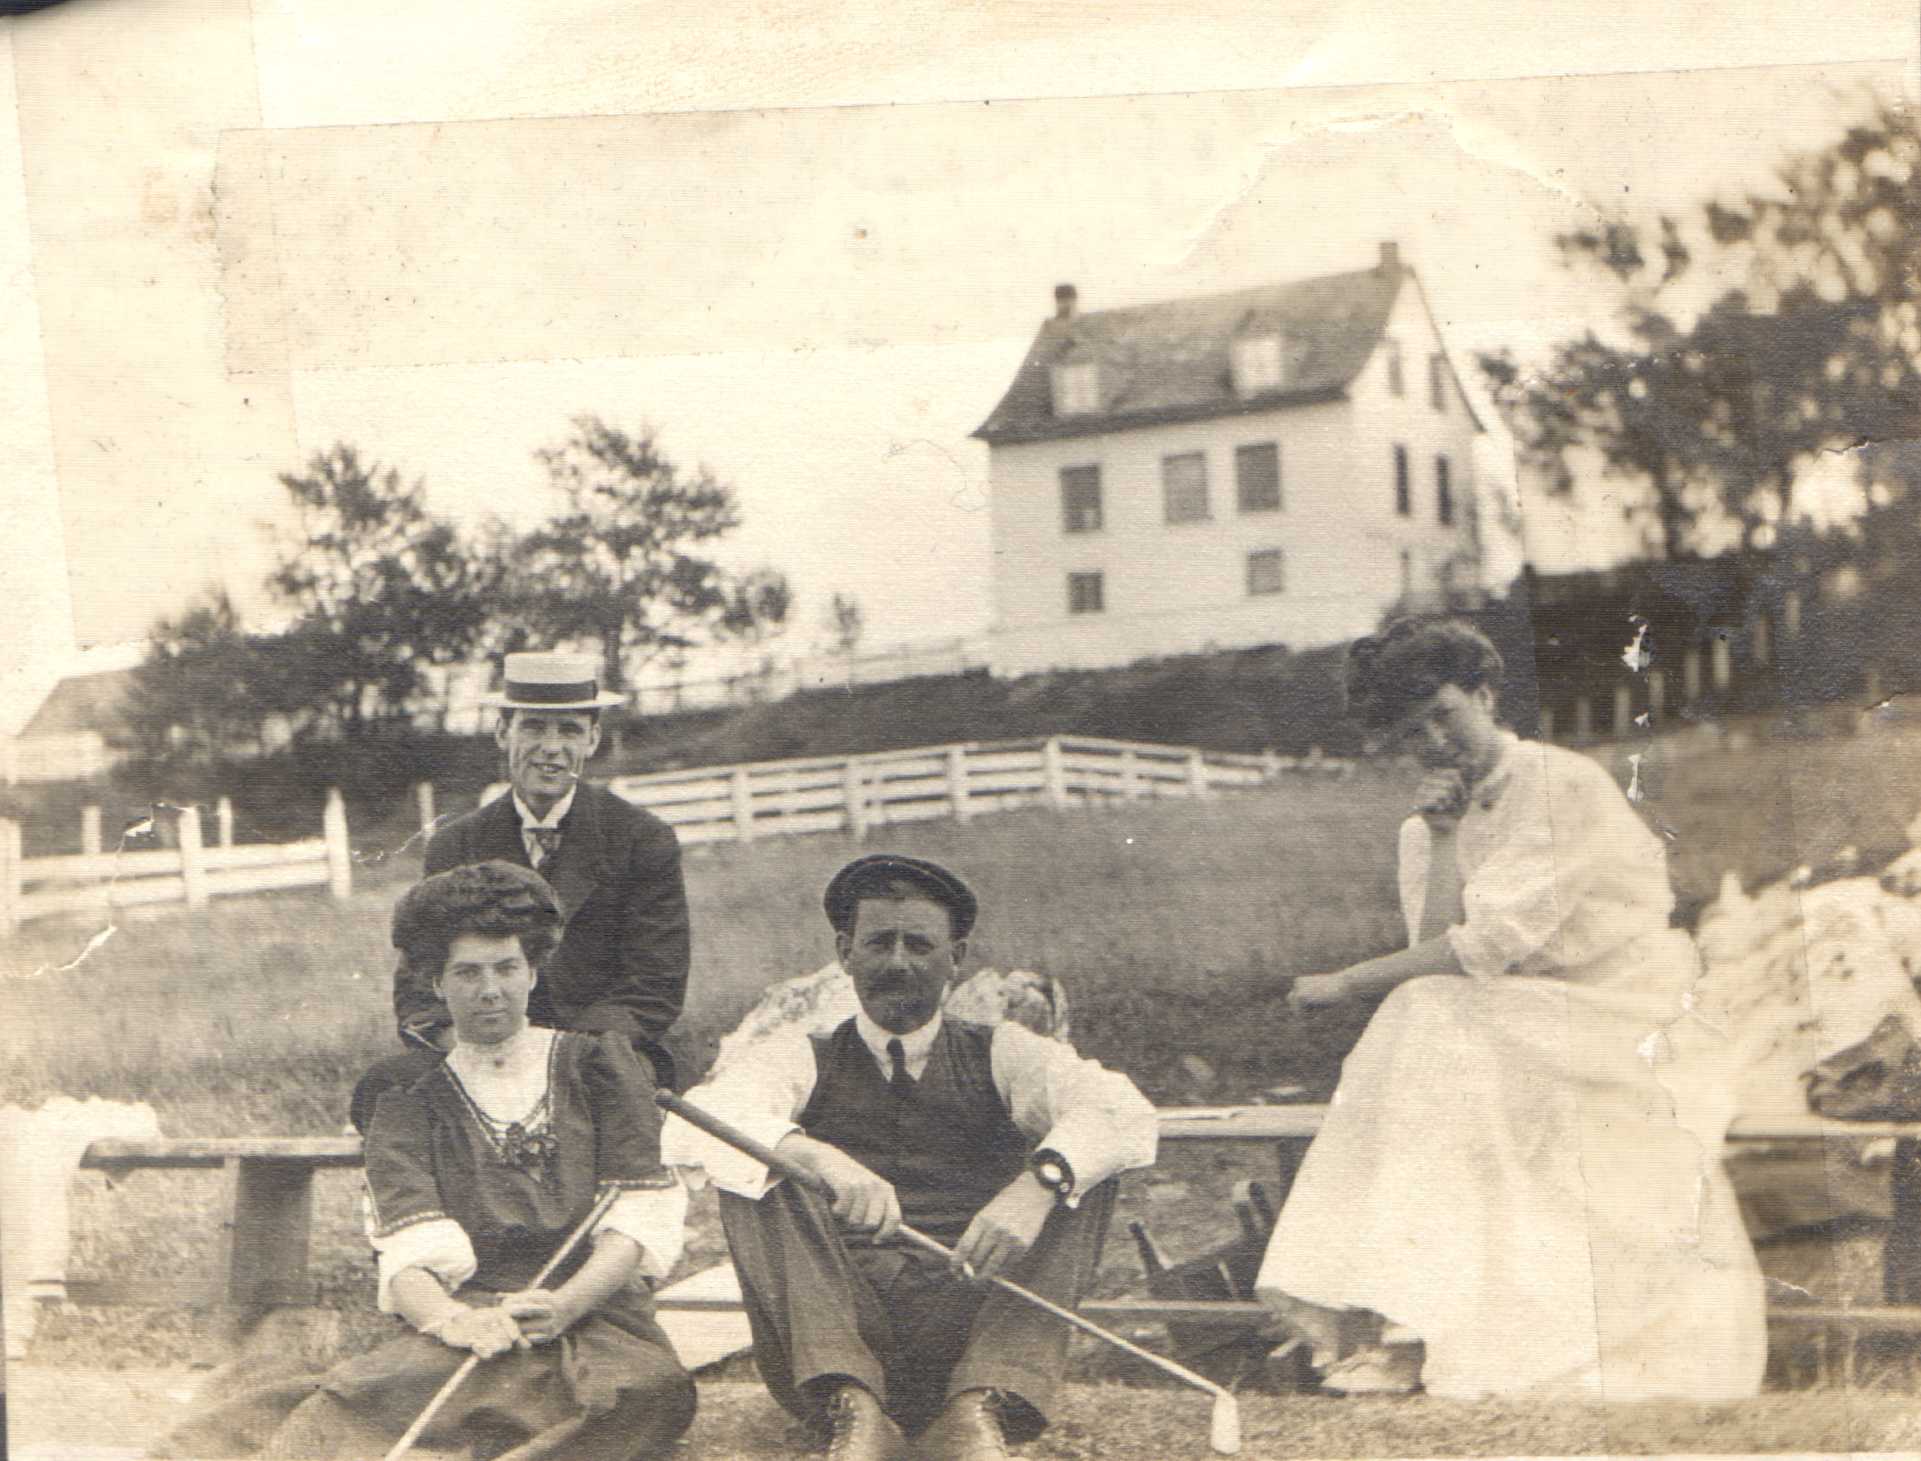 A photograph shows two men and two women sitting. Two of them are holding golf clubs.